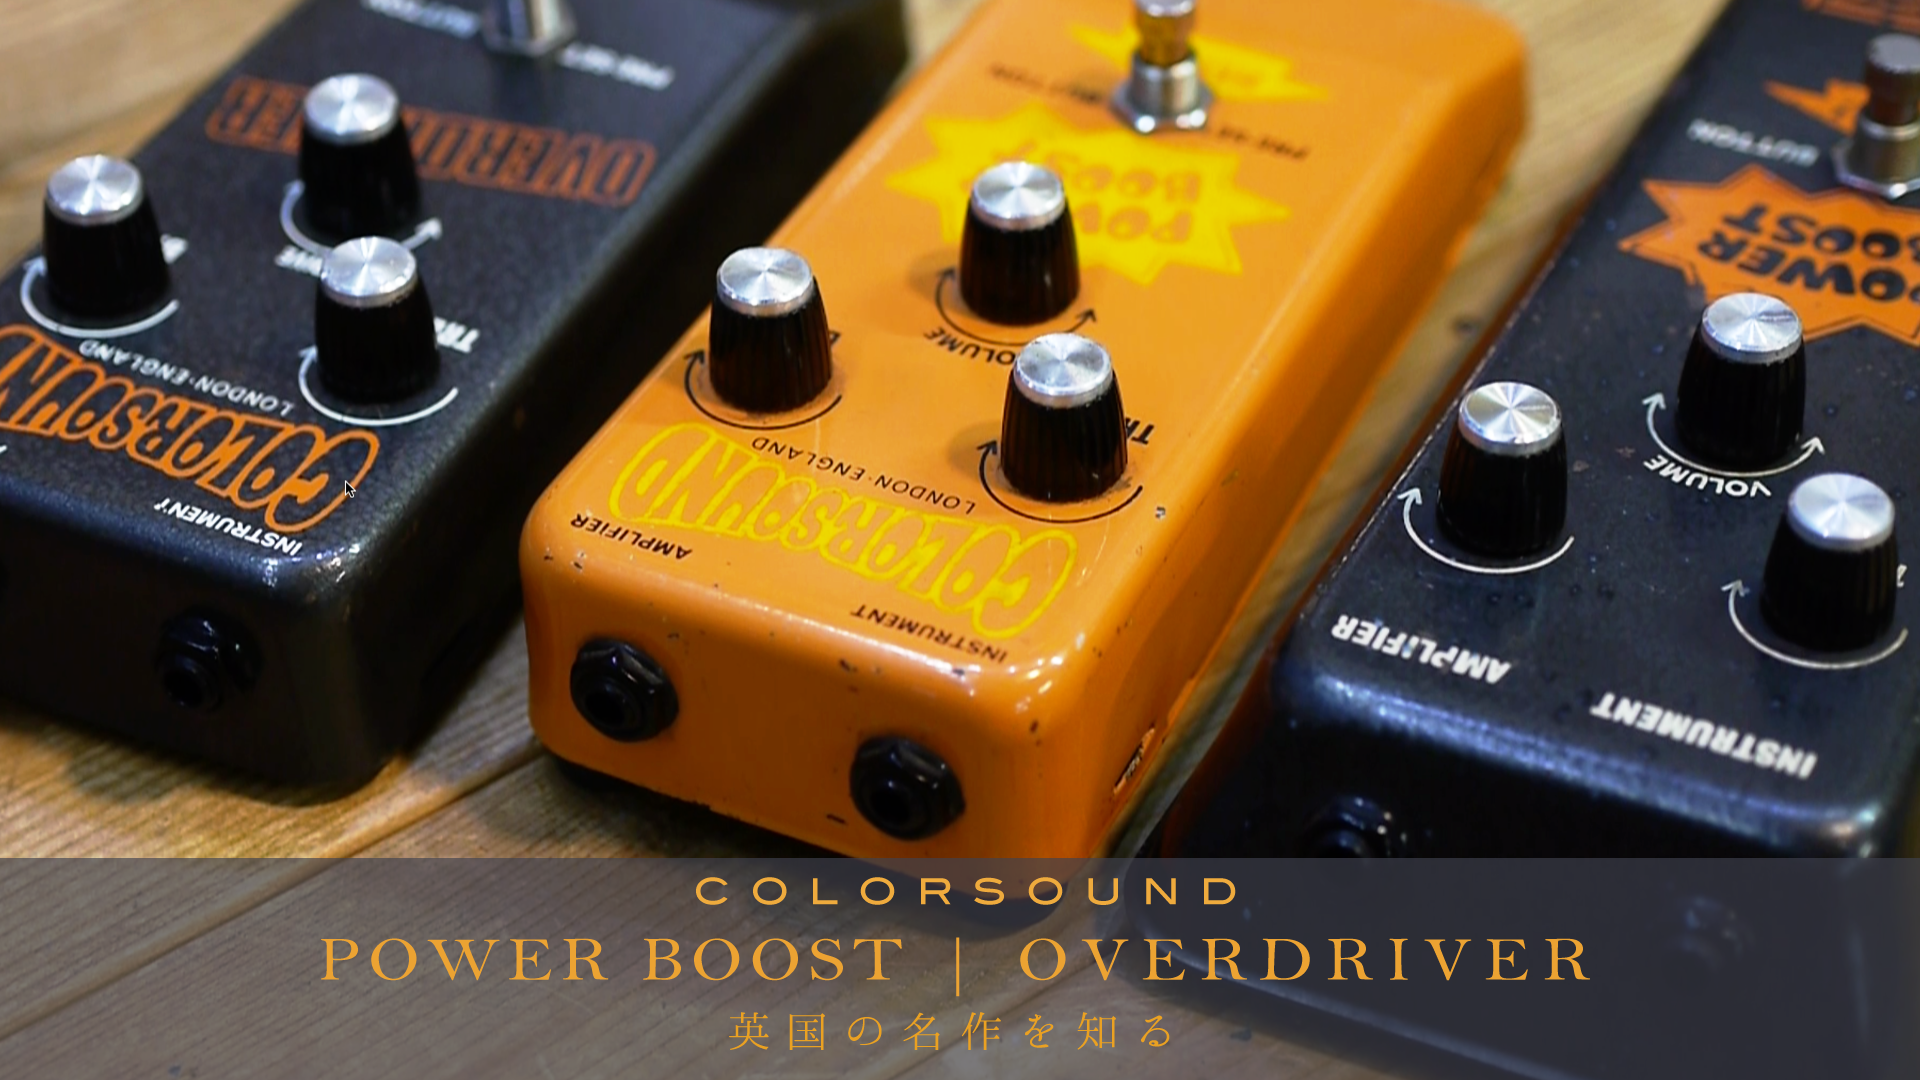 COLORSOUND POWER BOOST ＆ OVERDRIVER 〜最初期のプリアンプ・ペダル